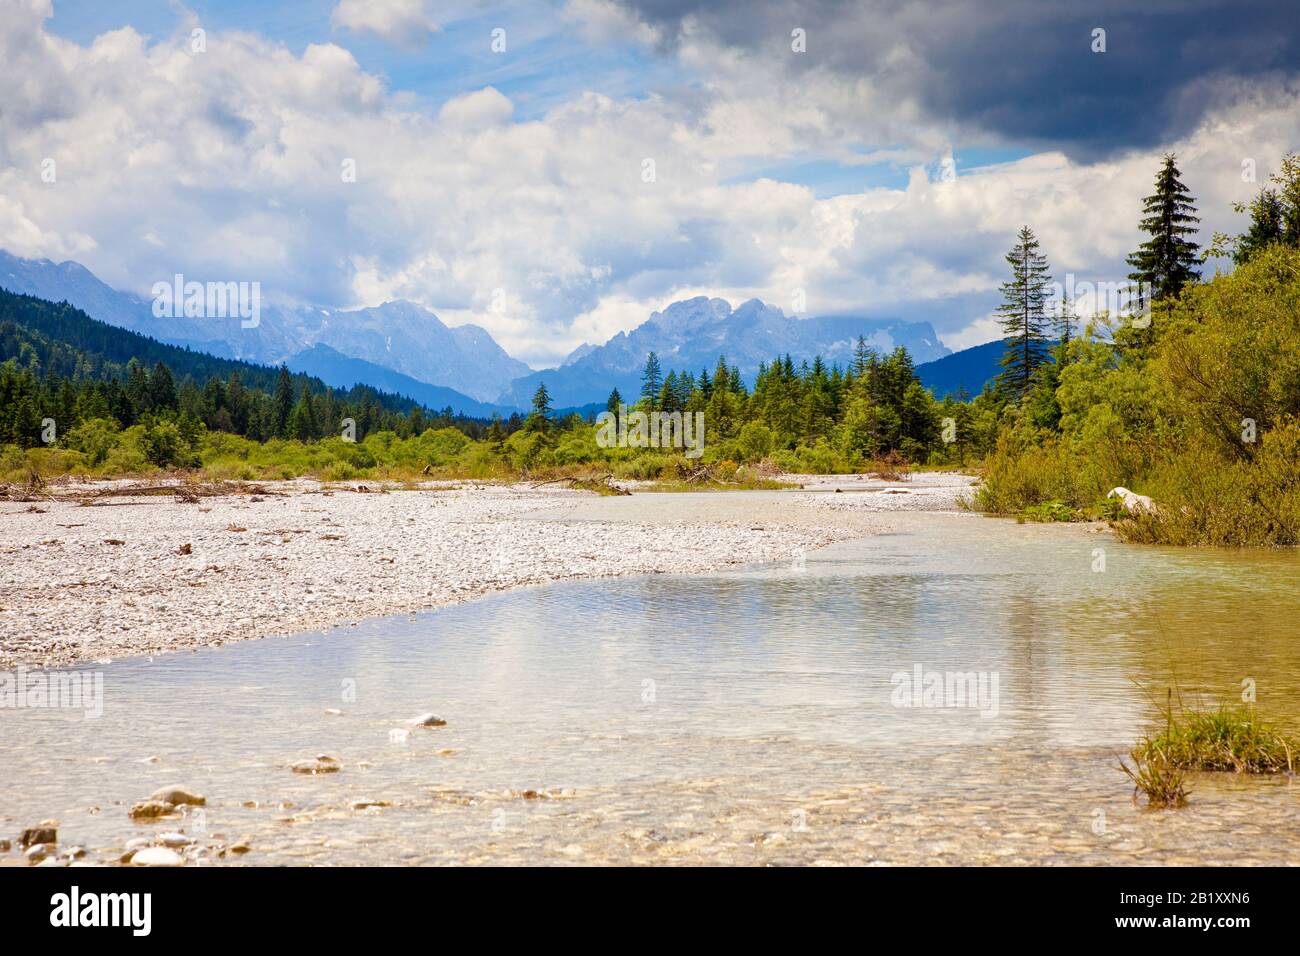 View along the partially dry bed of the River Isar in summer, Bavarian Alps, Bavaria, Germany, towards the Wetterstein mountains Stock Photo